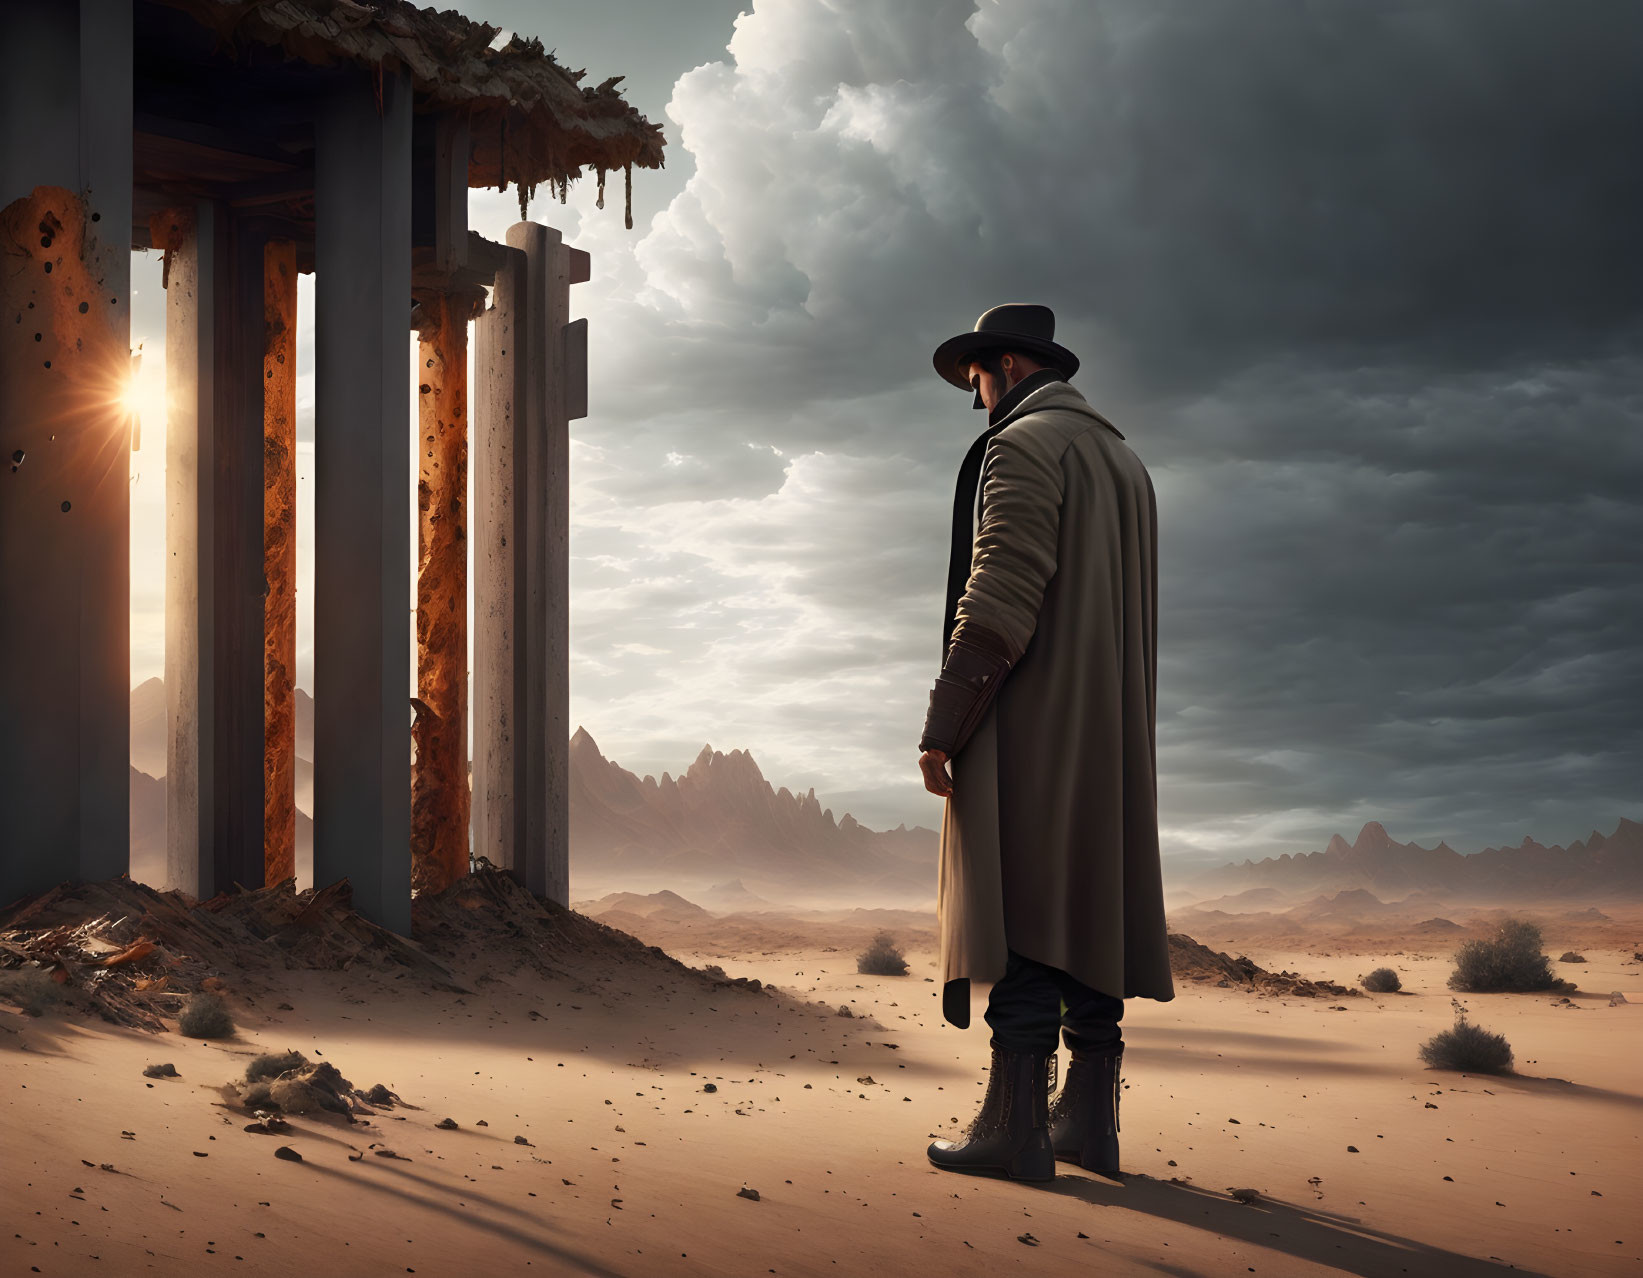 Lonely figure in trench coat and hat among desert ruins under dramatic sky